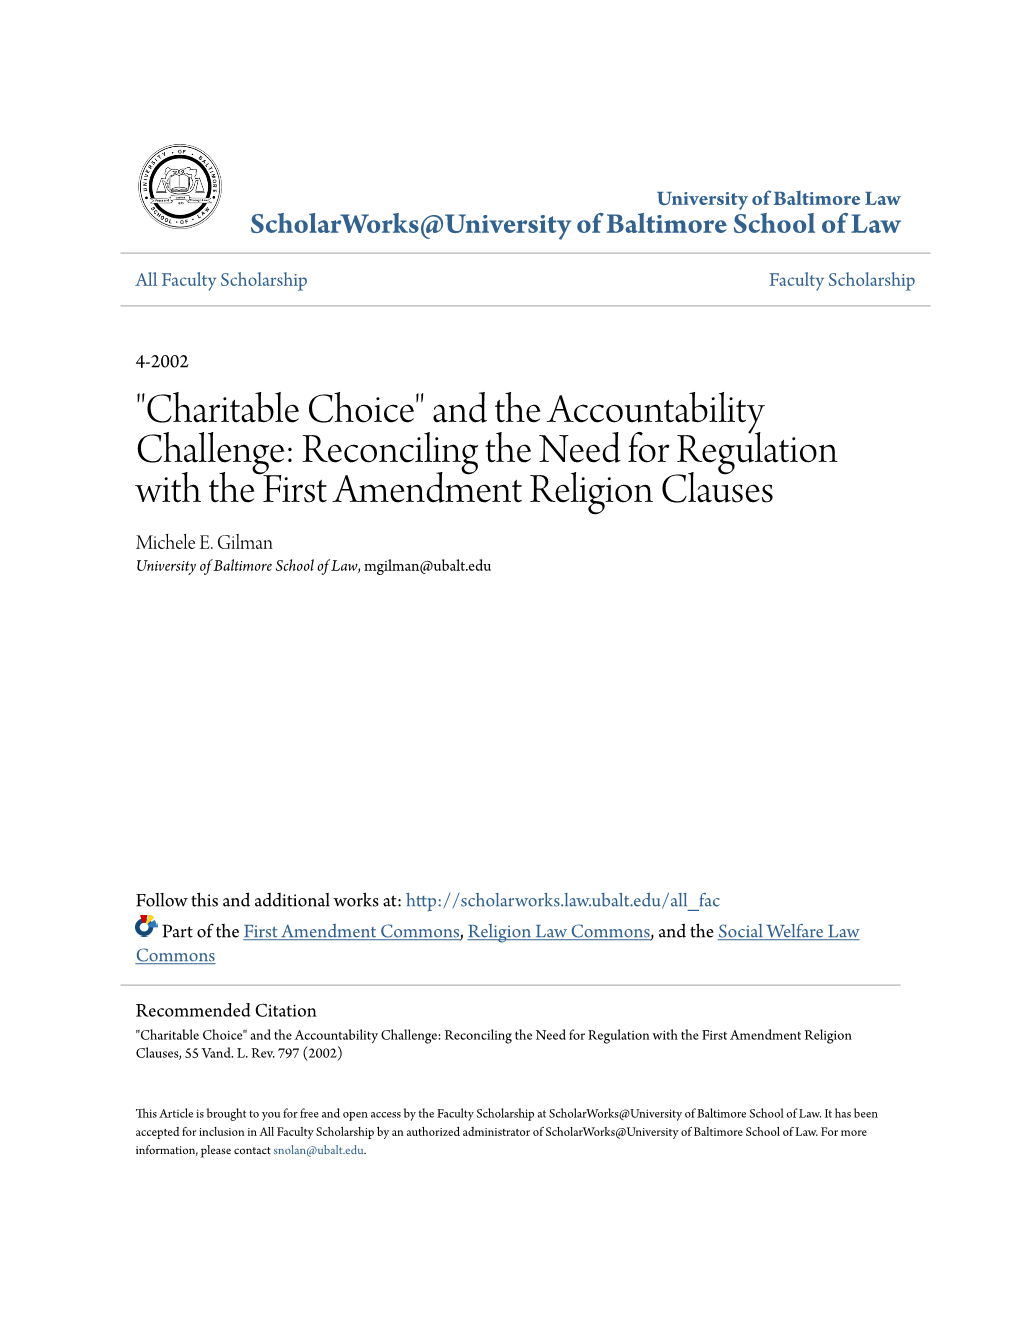 Charitable Choice" and the Accountability Challenge: Reconciling the Need for Regulation with the First Amendment Religion Clauses Michele E